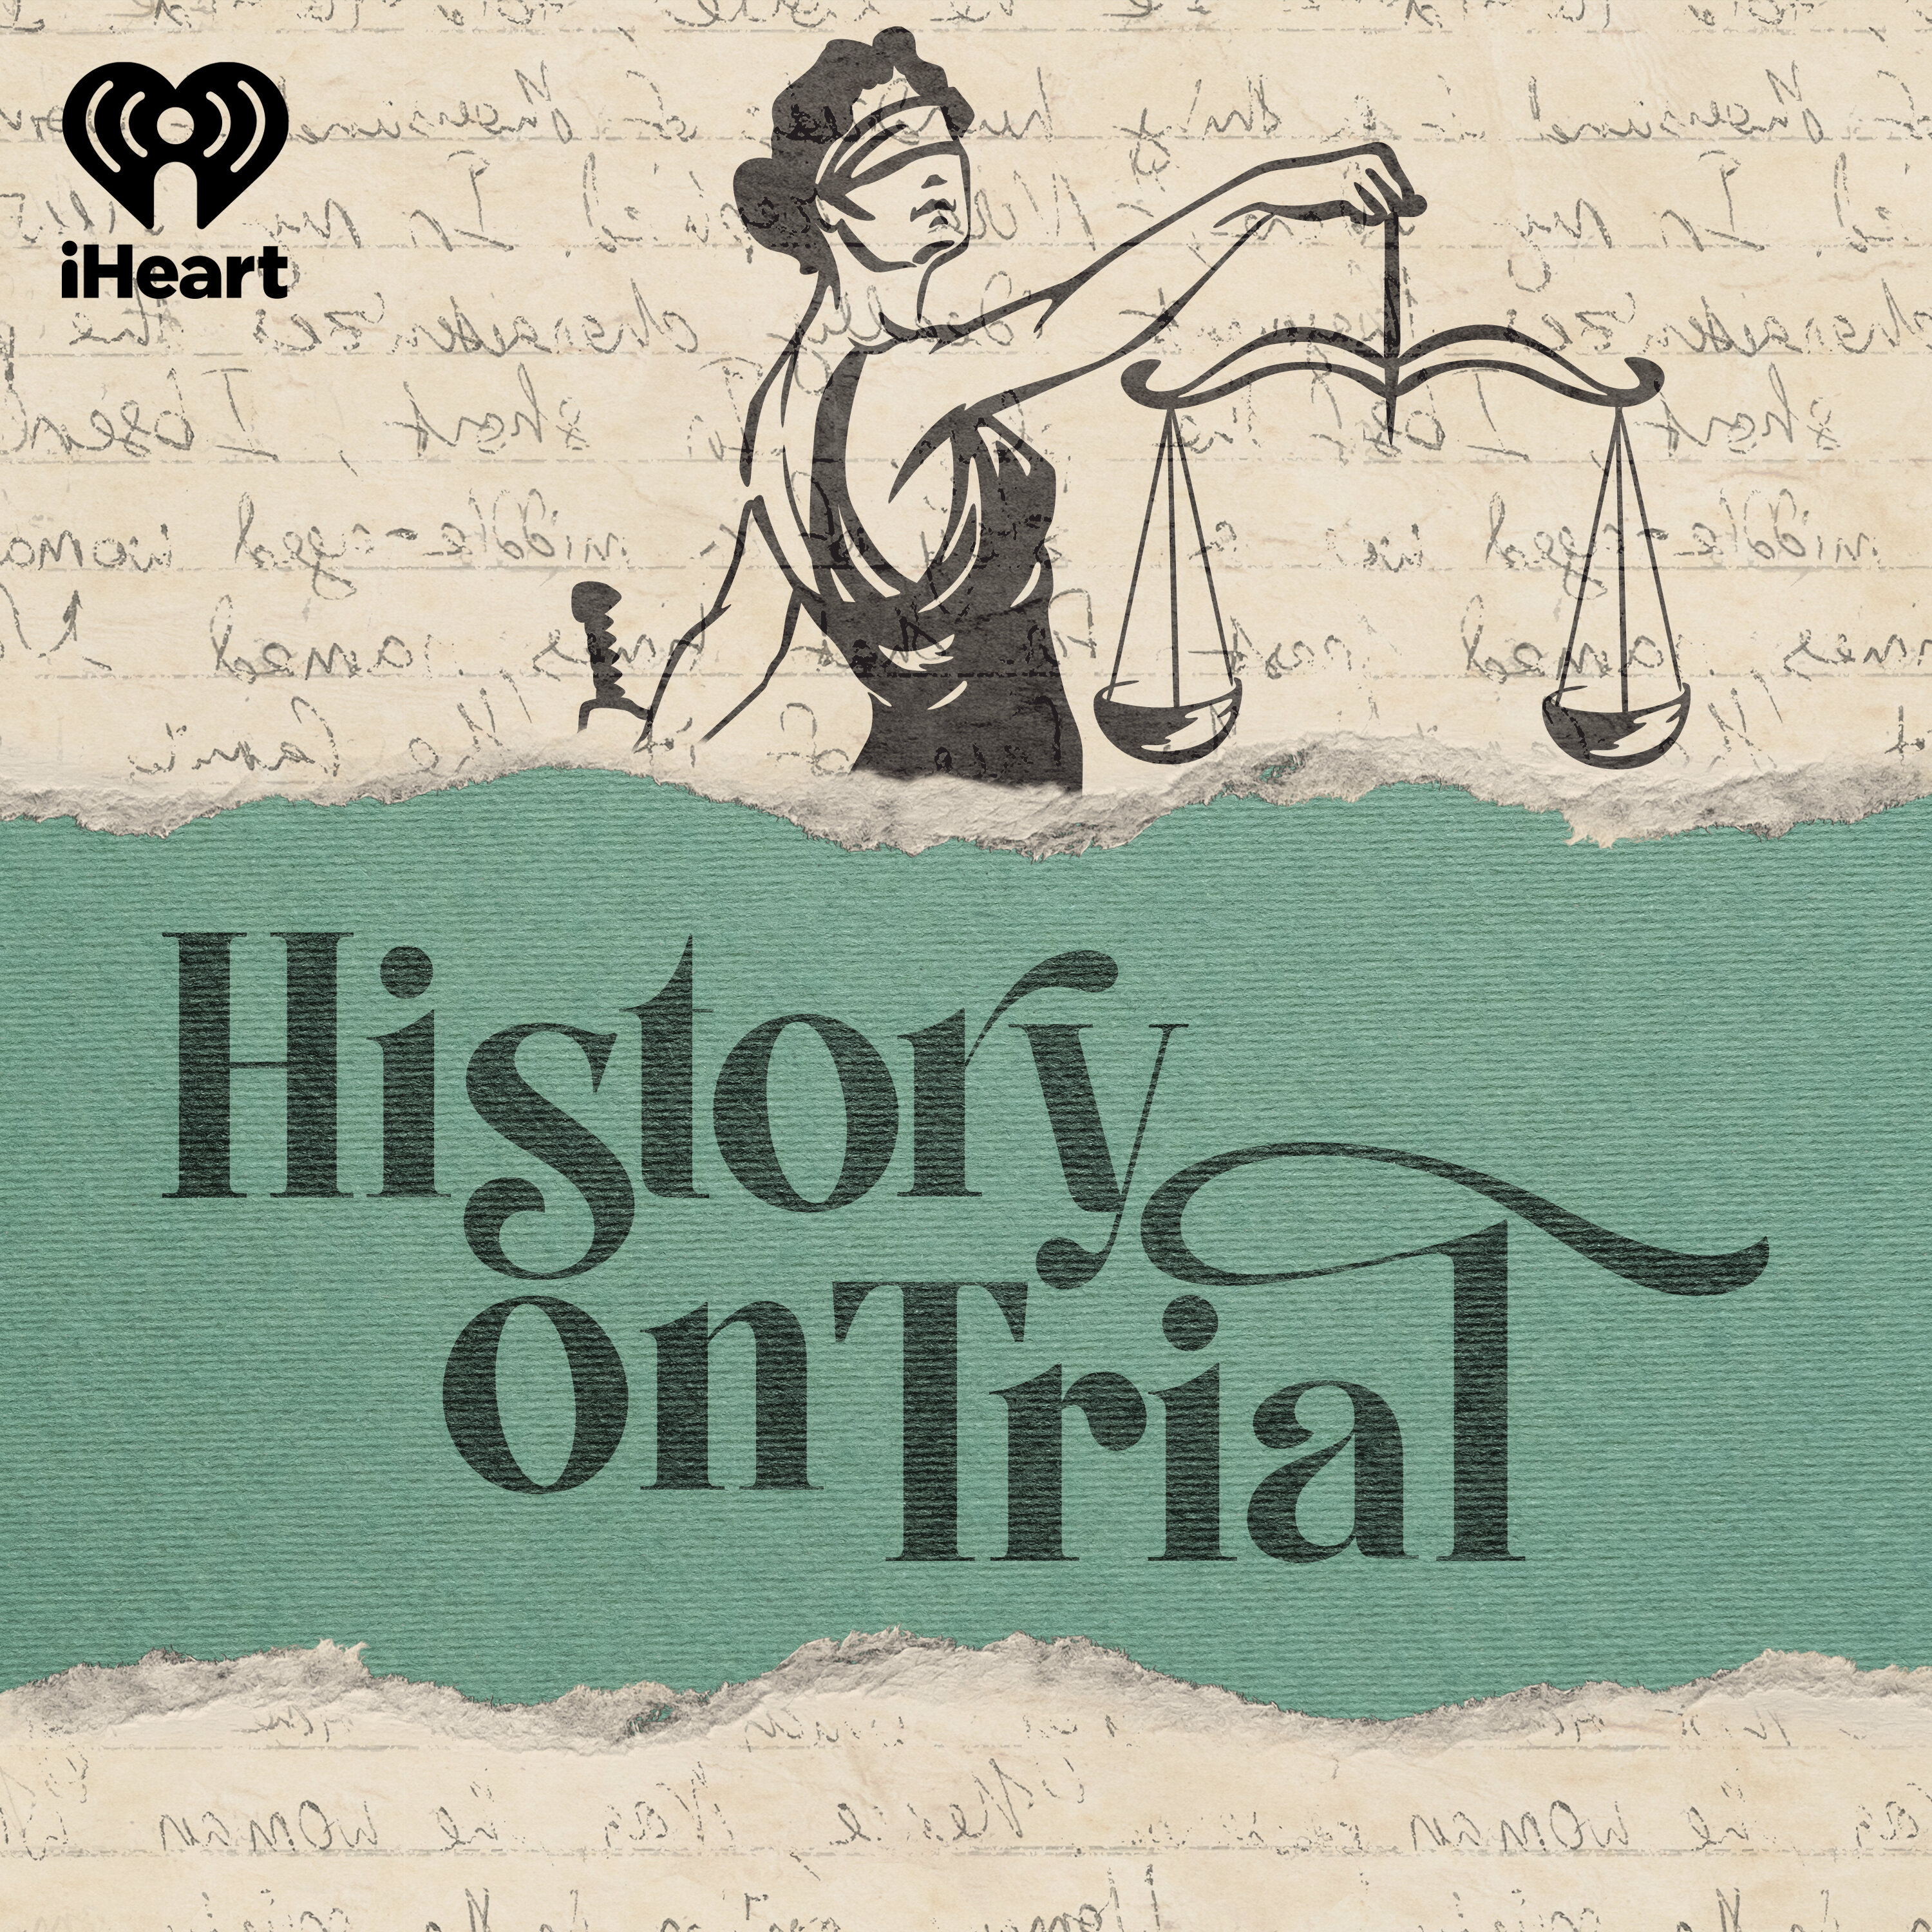 Introducing: History on Trial